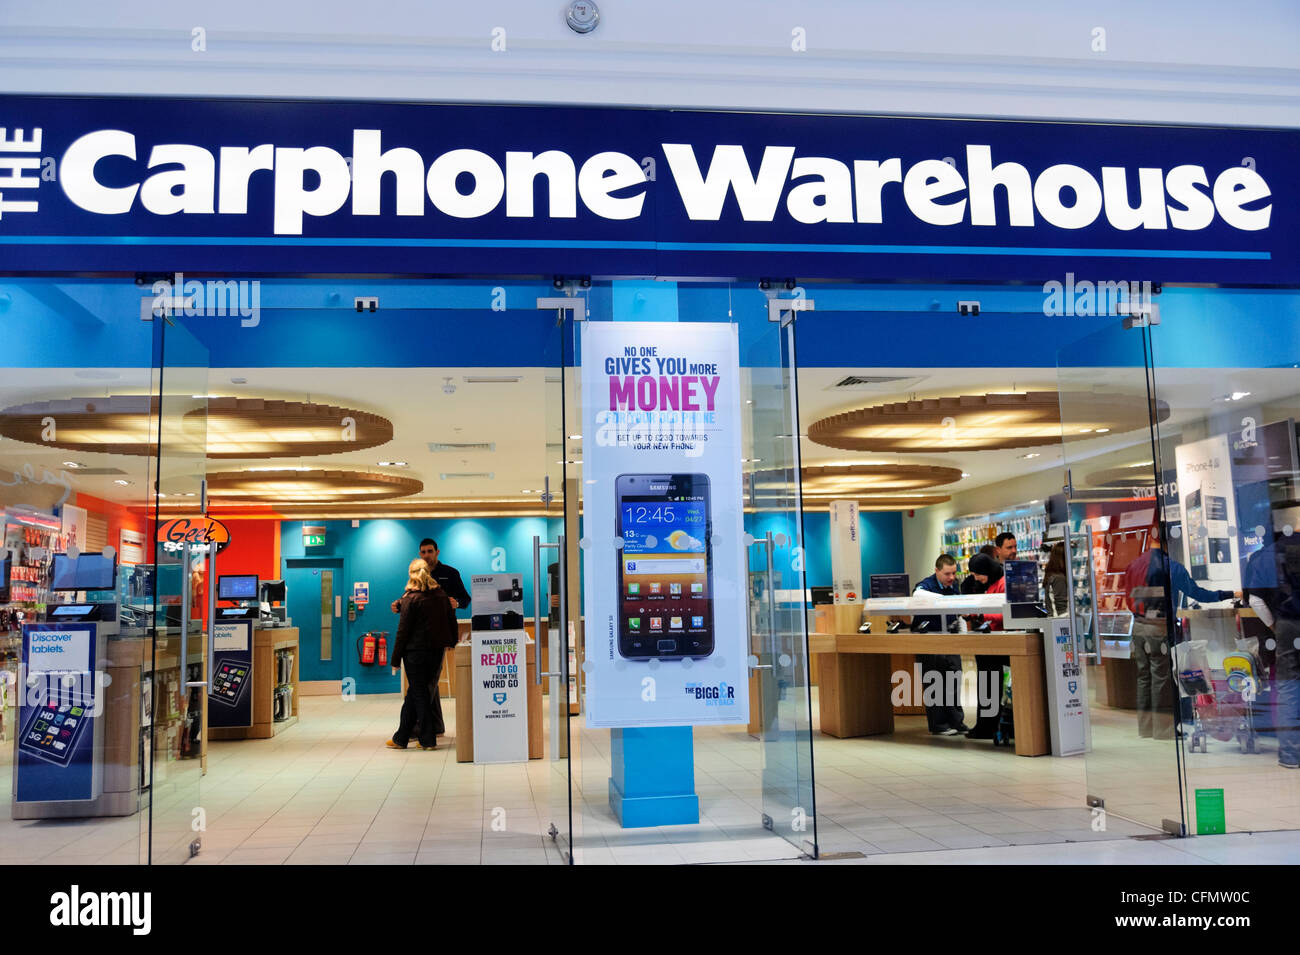 Carphone Warehouse a Merry Hill shopping centre, West Midlands, Regno Unito. Foto Stock